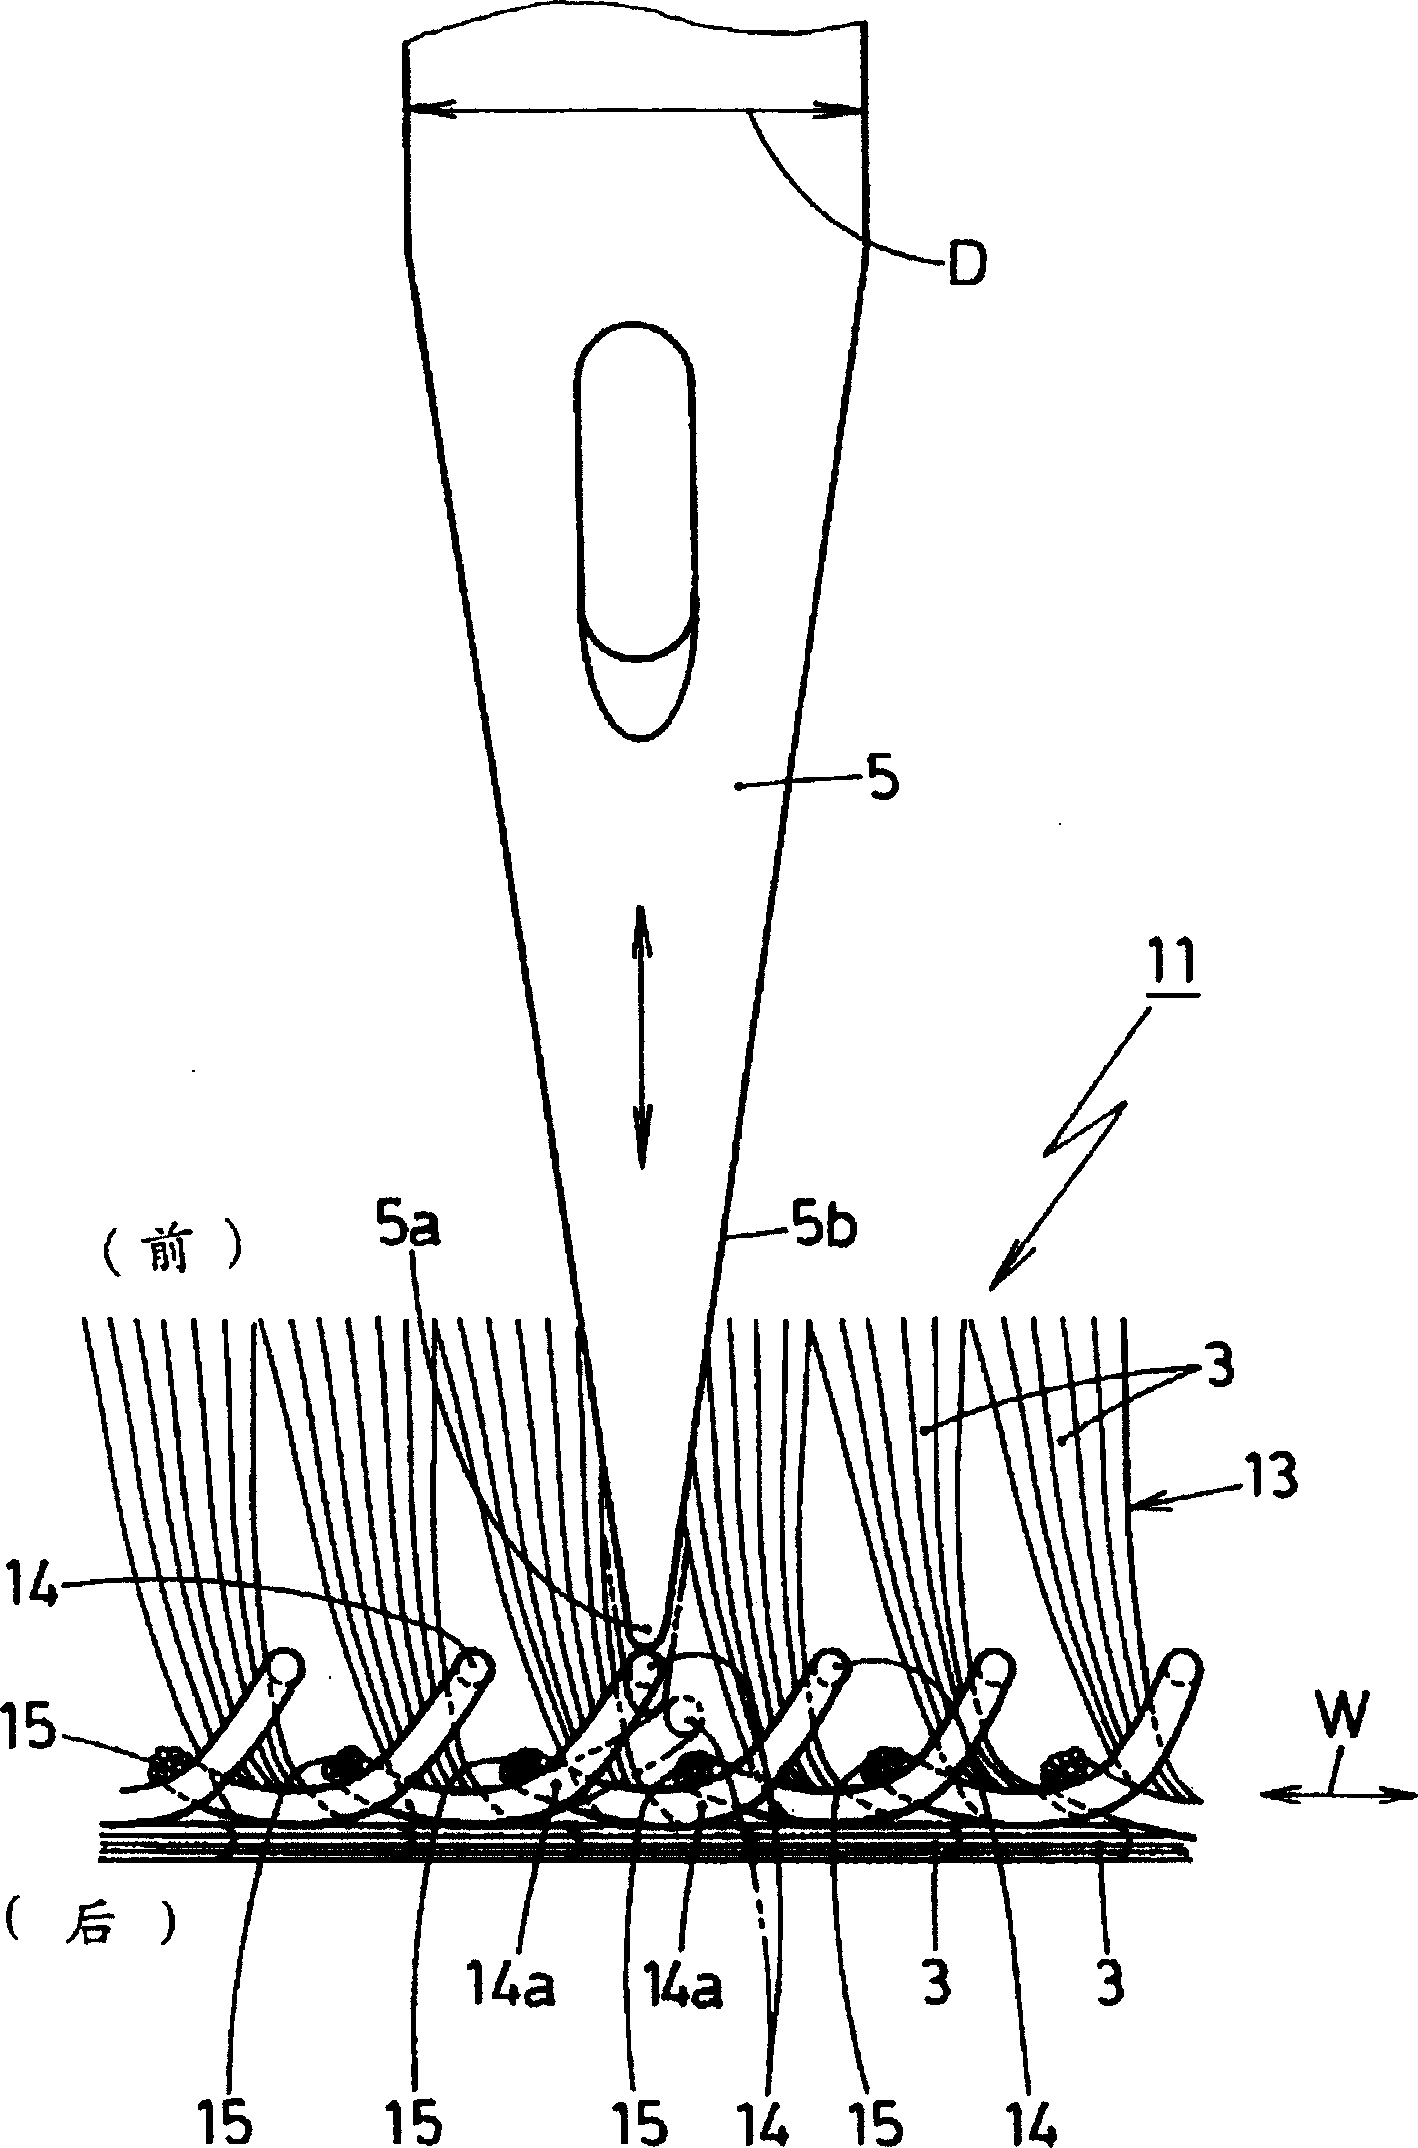 Terry knitting fabric, and its producing method and sewing method